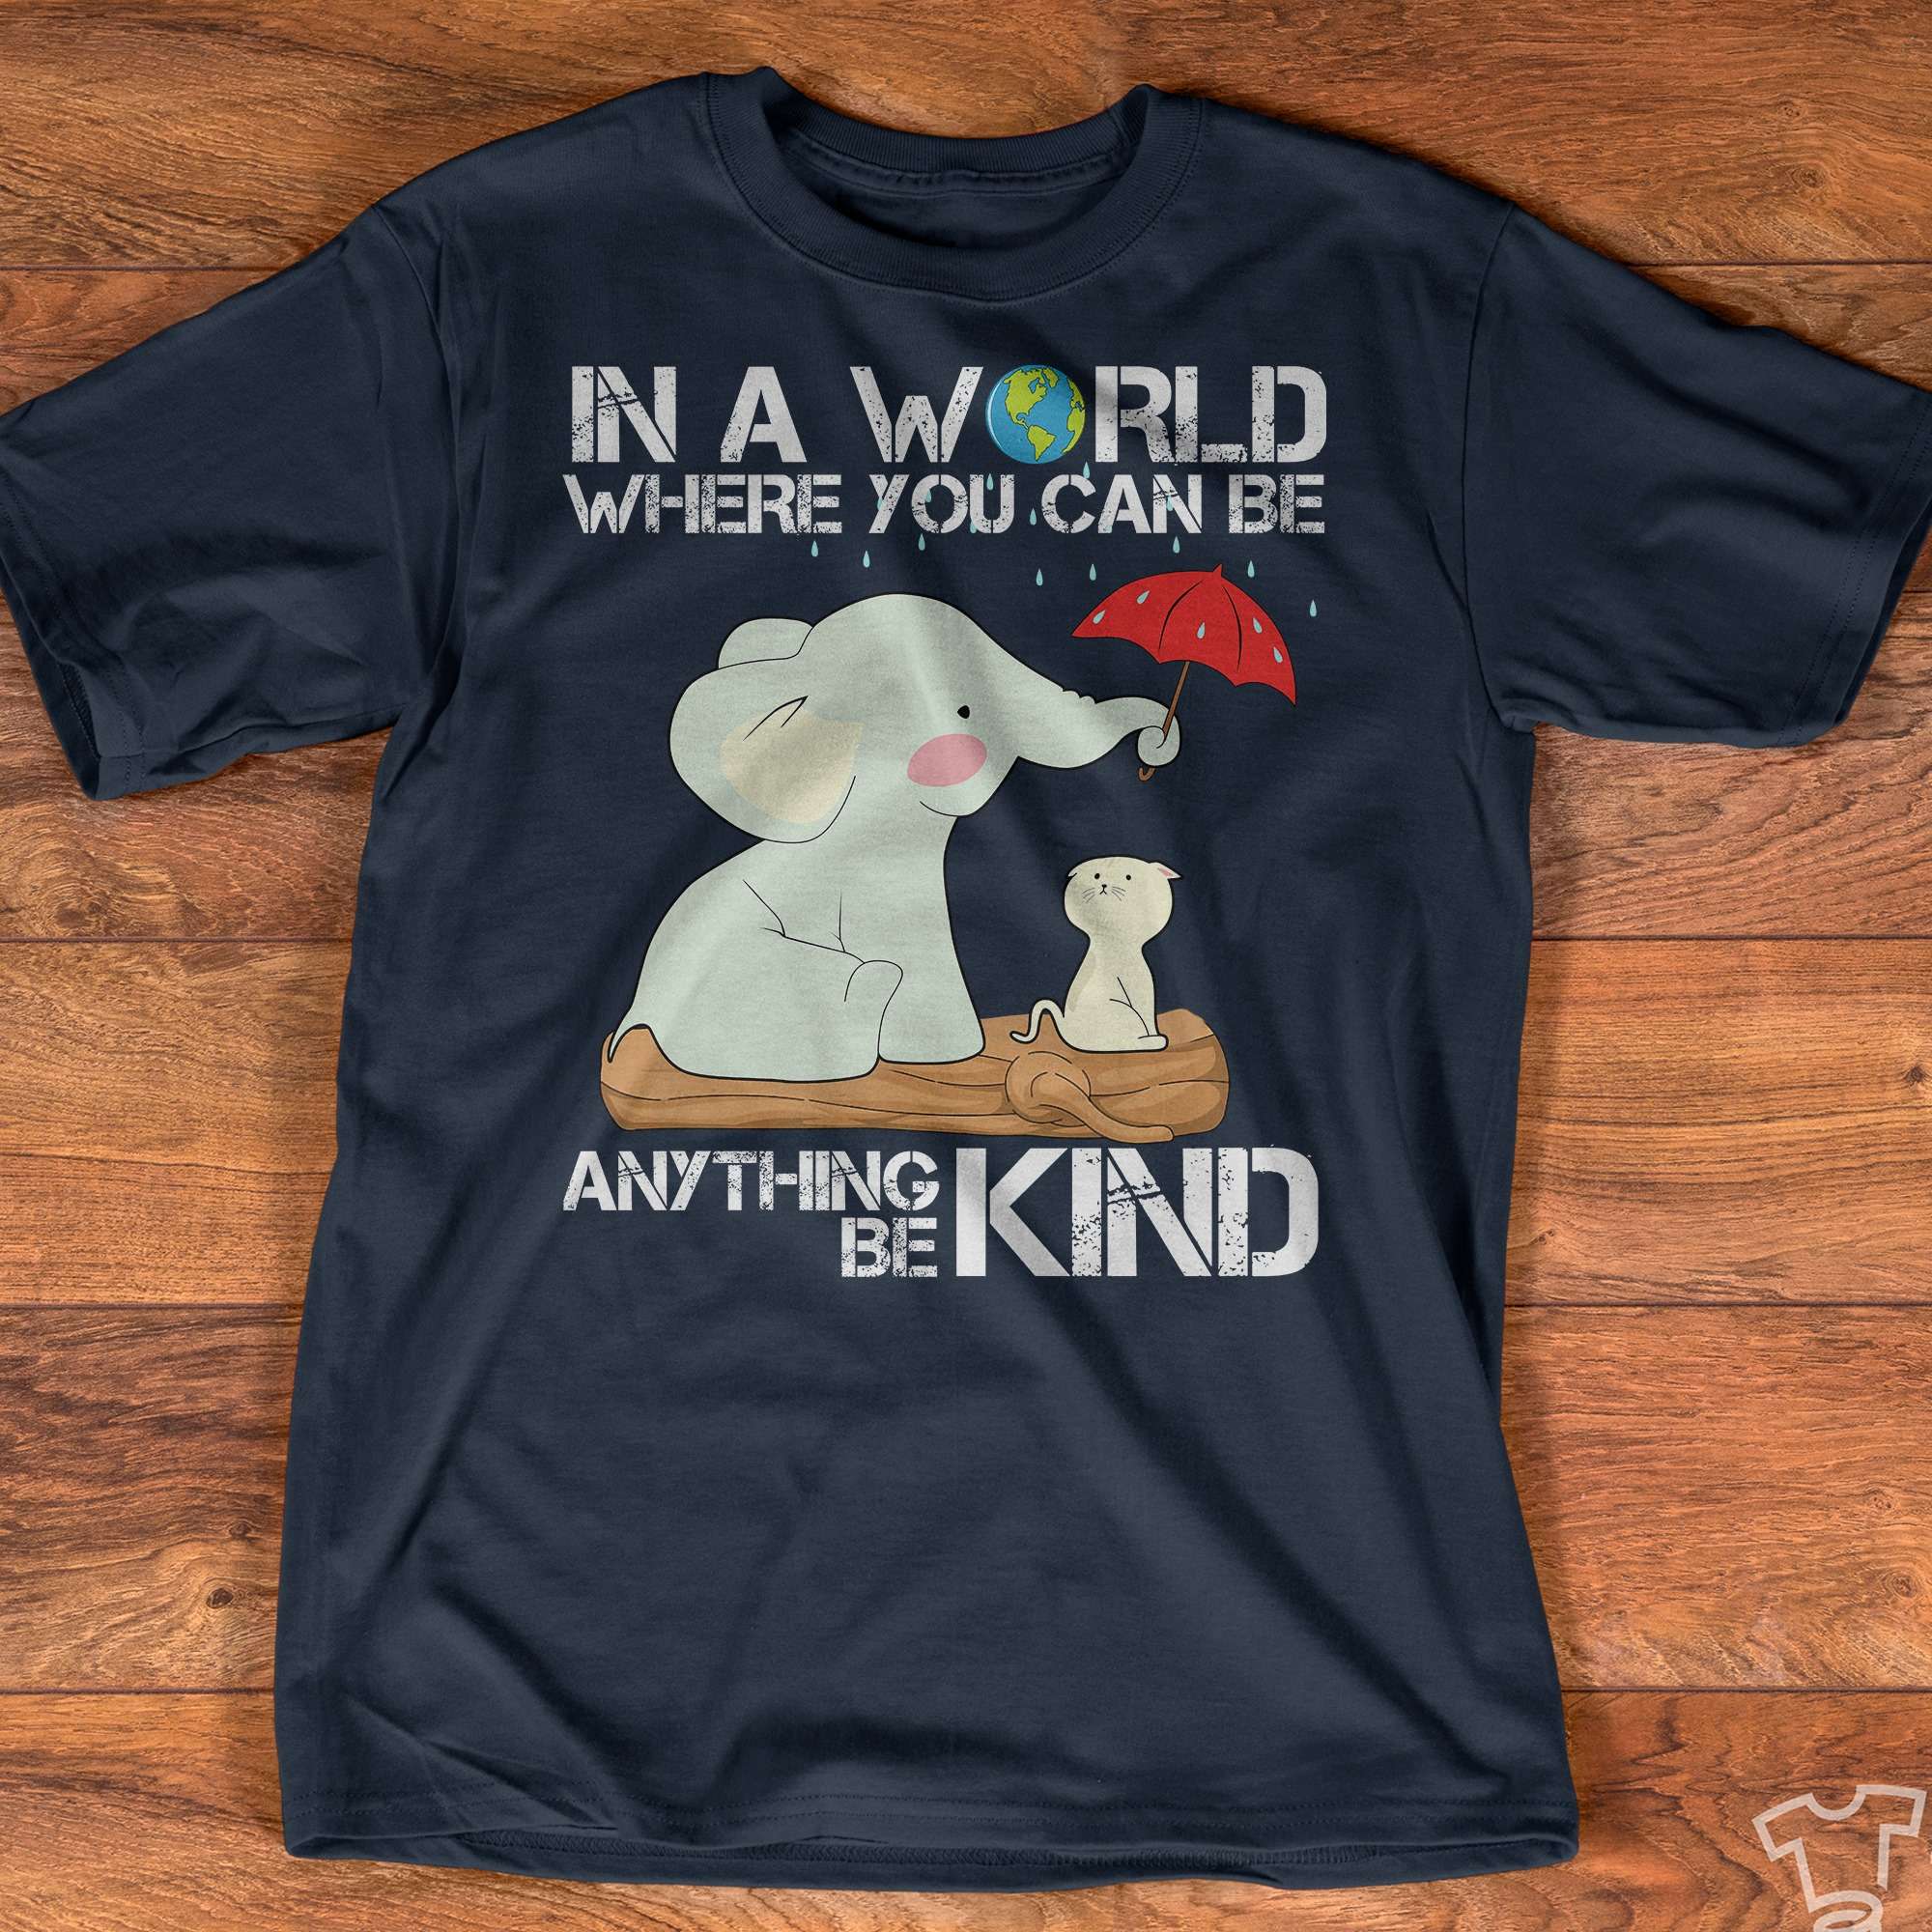 In a world where can you can be anything, be kind - Be kind in world, elephant and cat